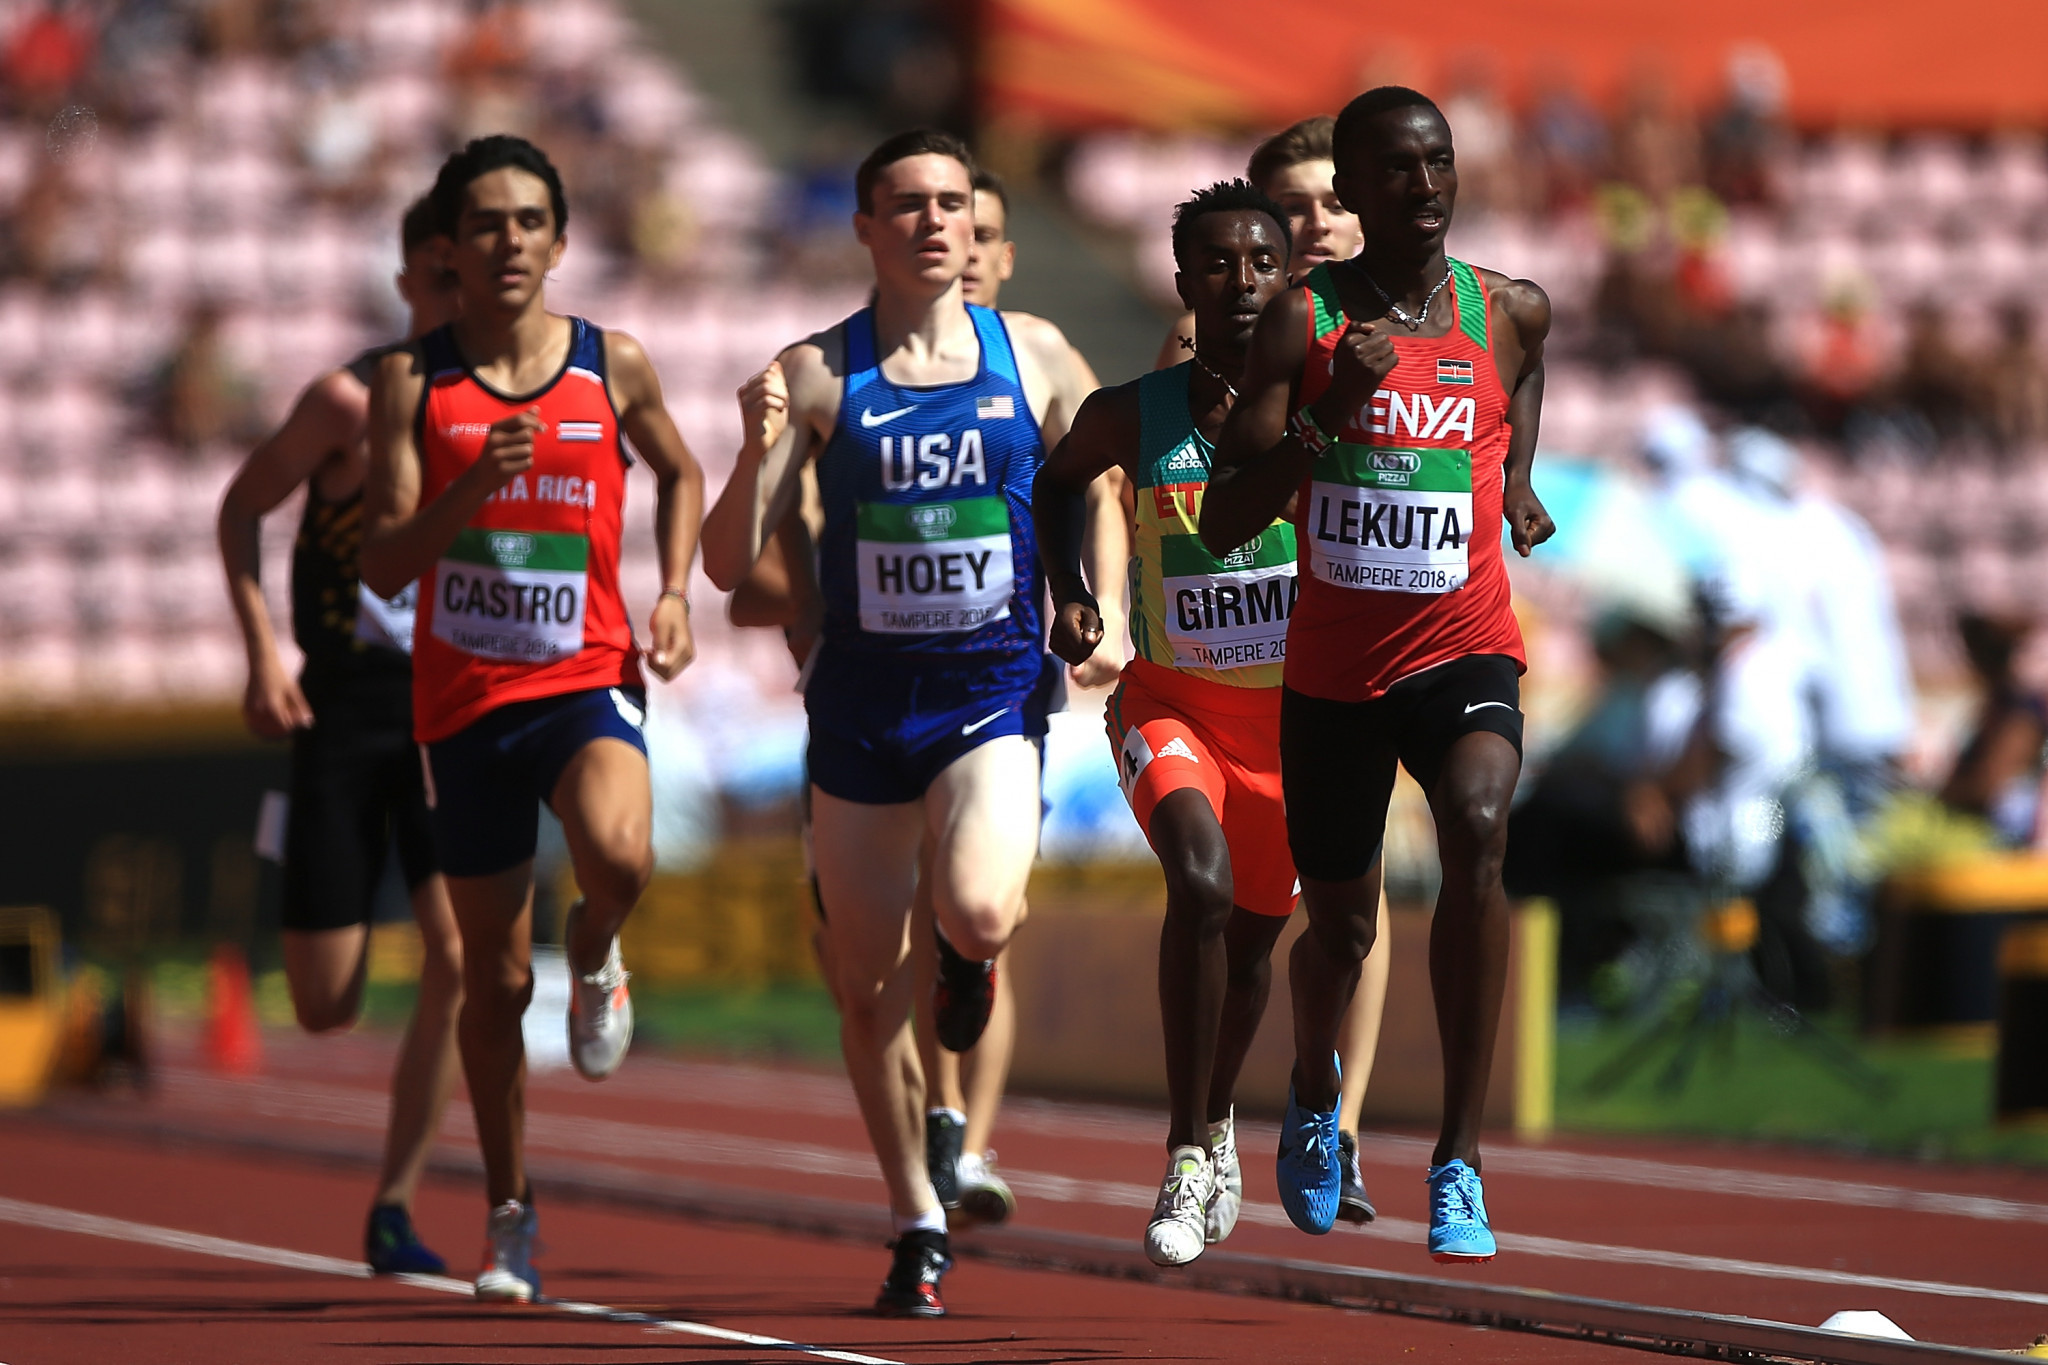 Kenya finish top of the medals table at IAAF World Under-20 Championships in Tampere